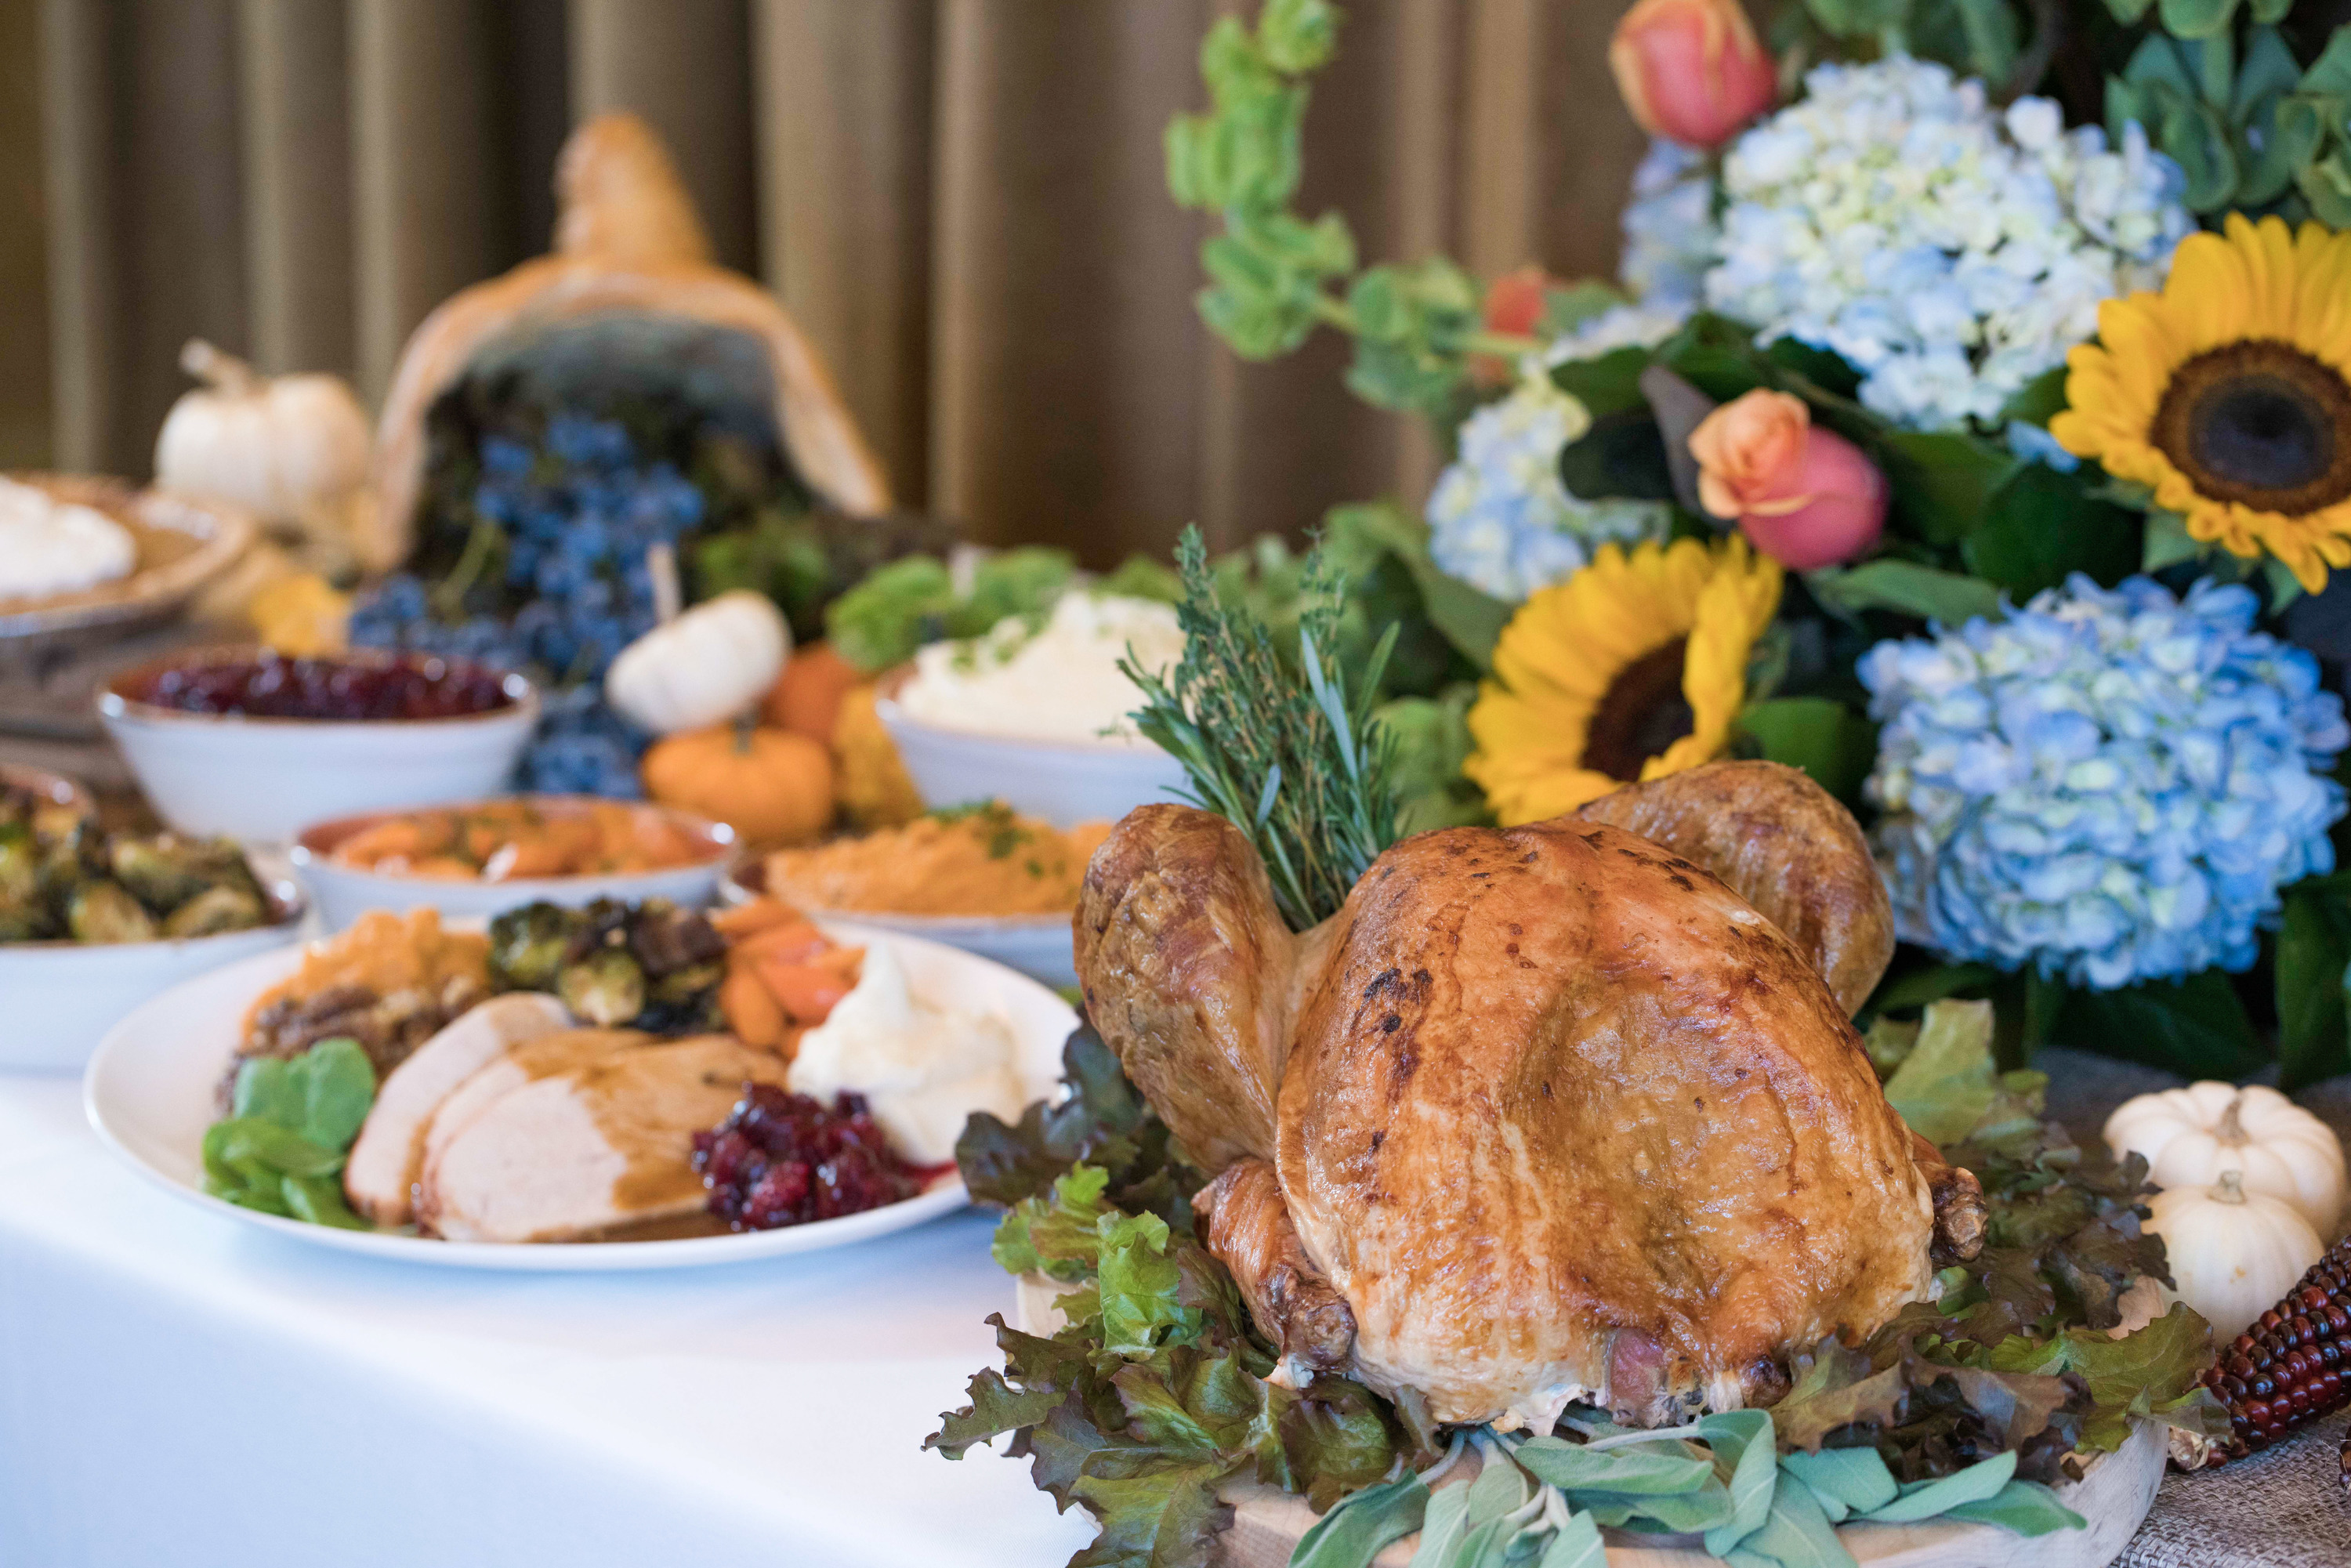 10 Best Restaurants Open on Thanksgiving Day in NYC For A Tasty Dinner